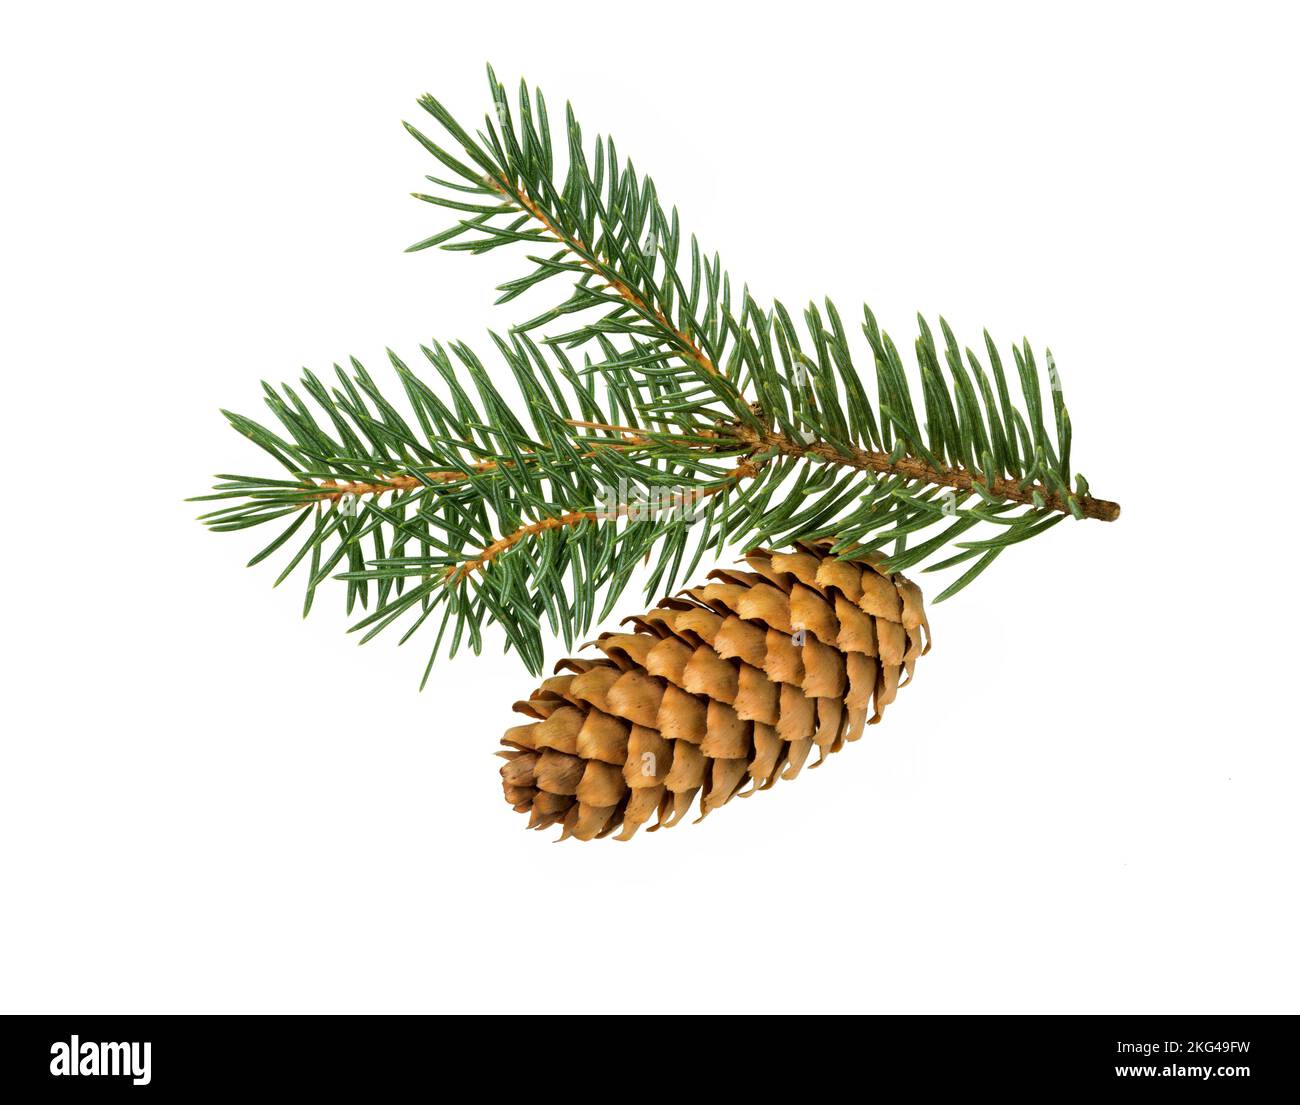 Fir tree branch isolated on white background. Pine branch. Stock Photo